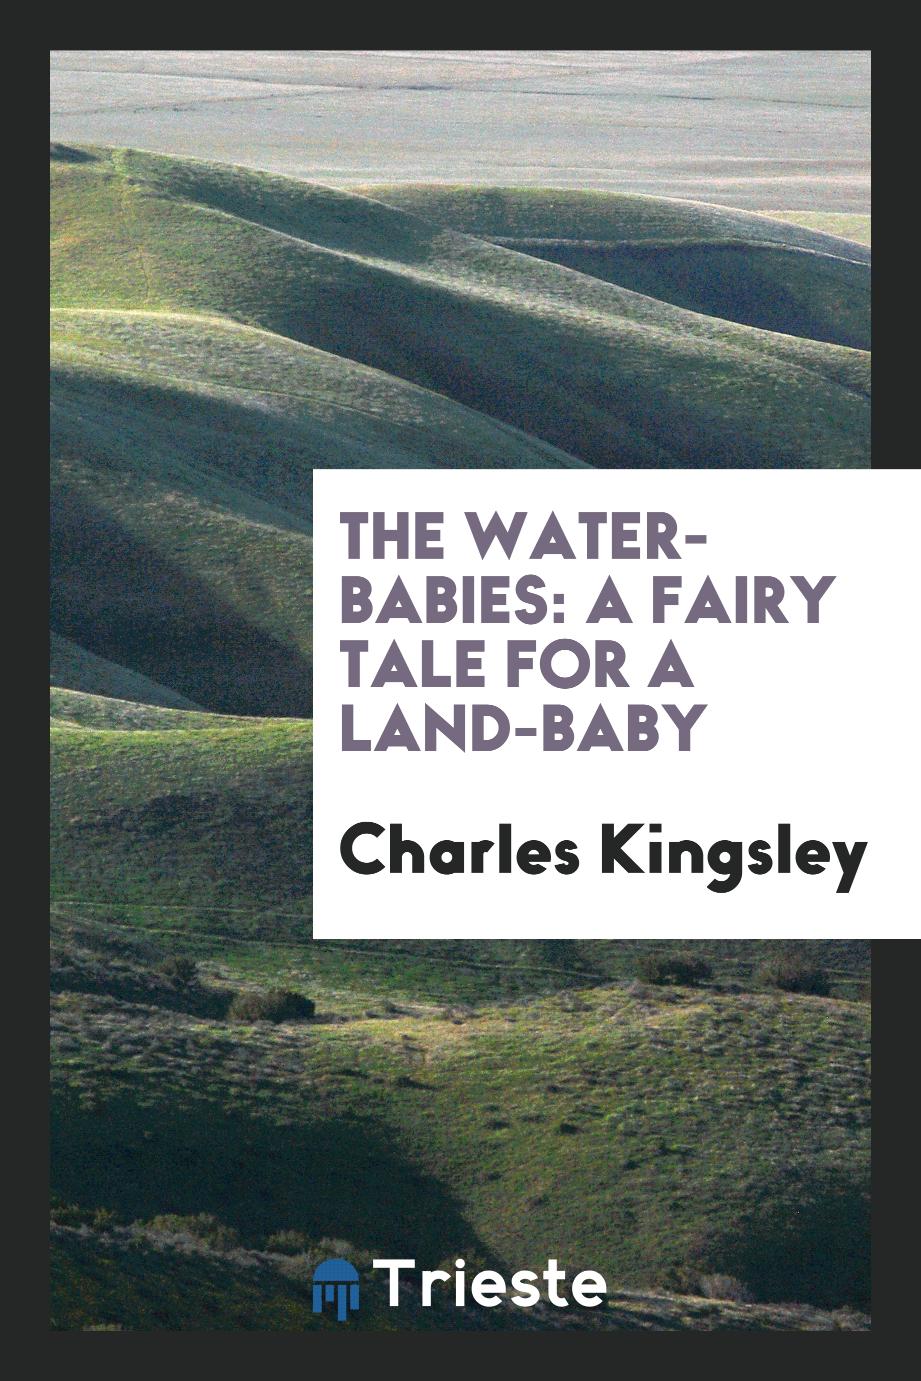 The water-babies: a fairy tale for a land-baby